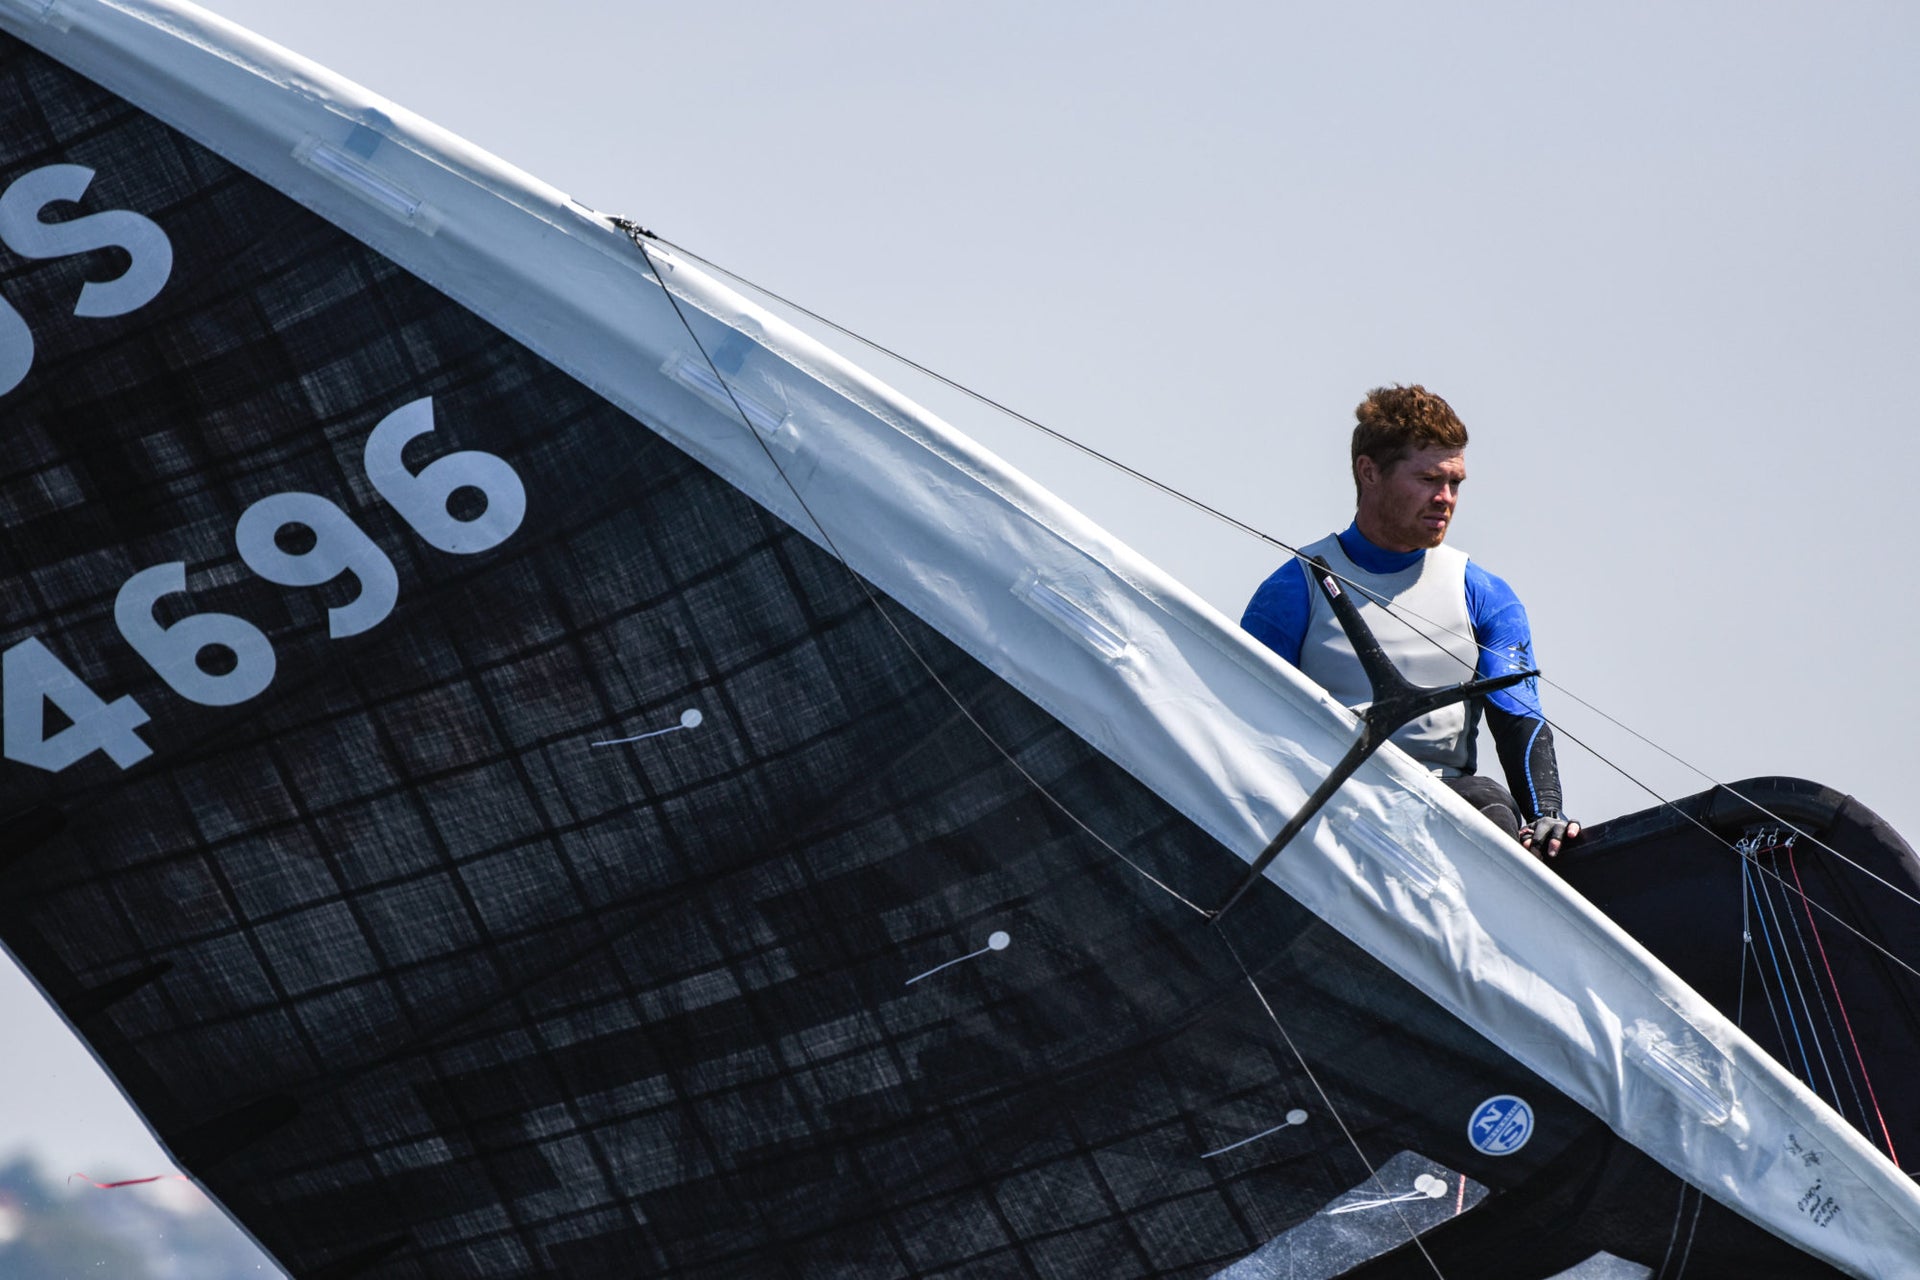 Slingsby Dominates at Moth Worlds